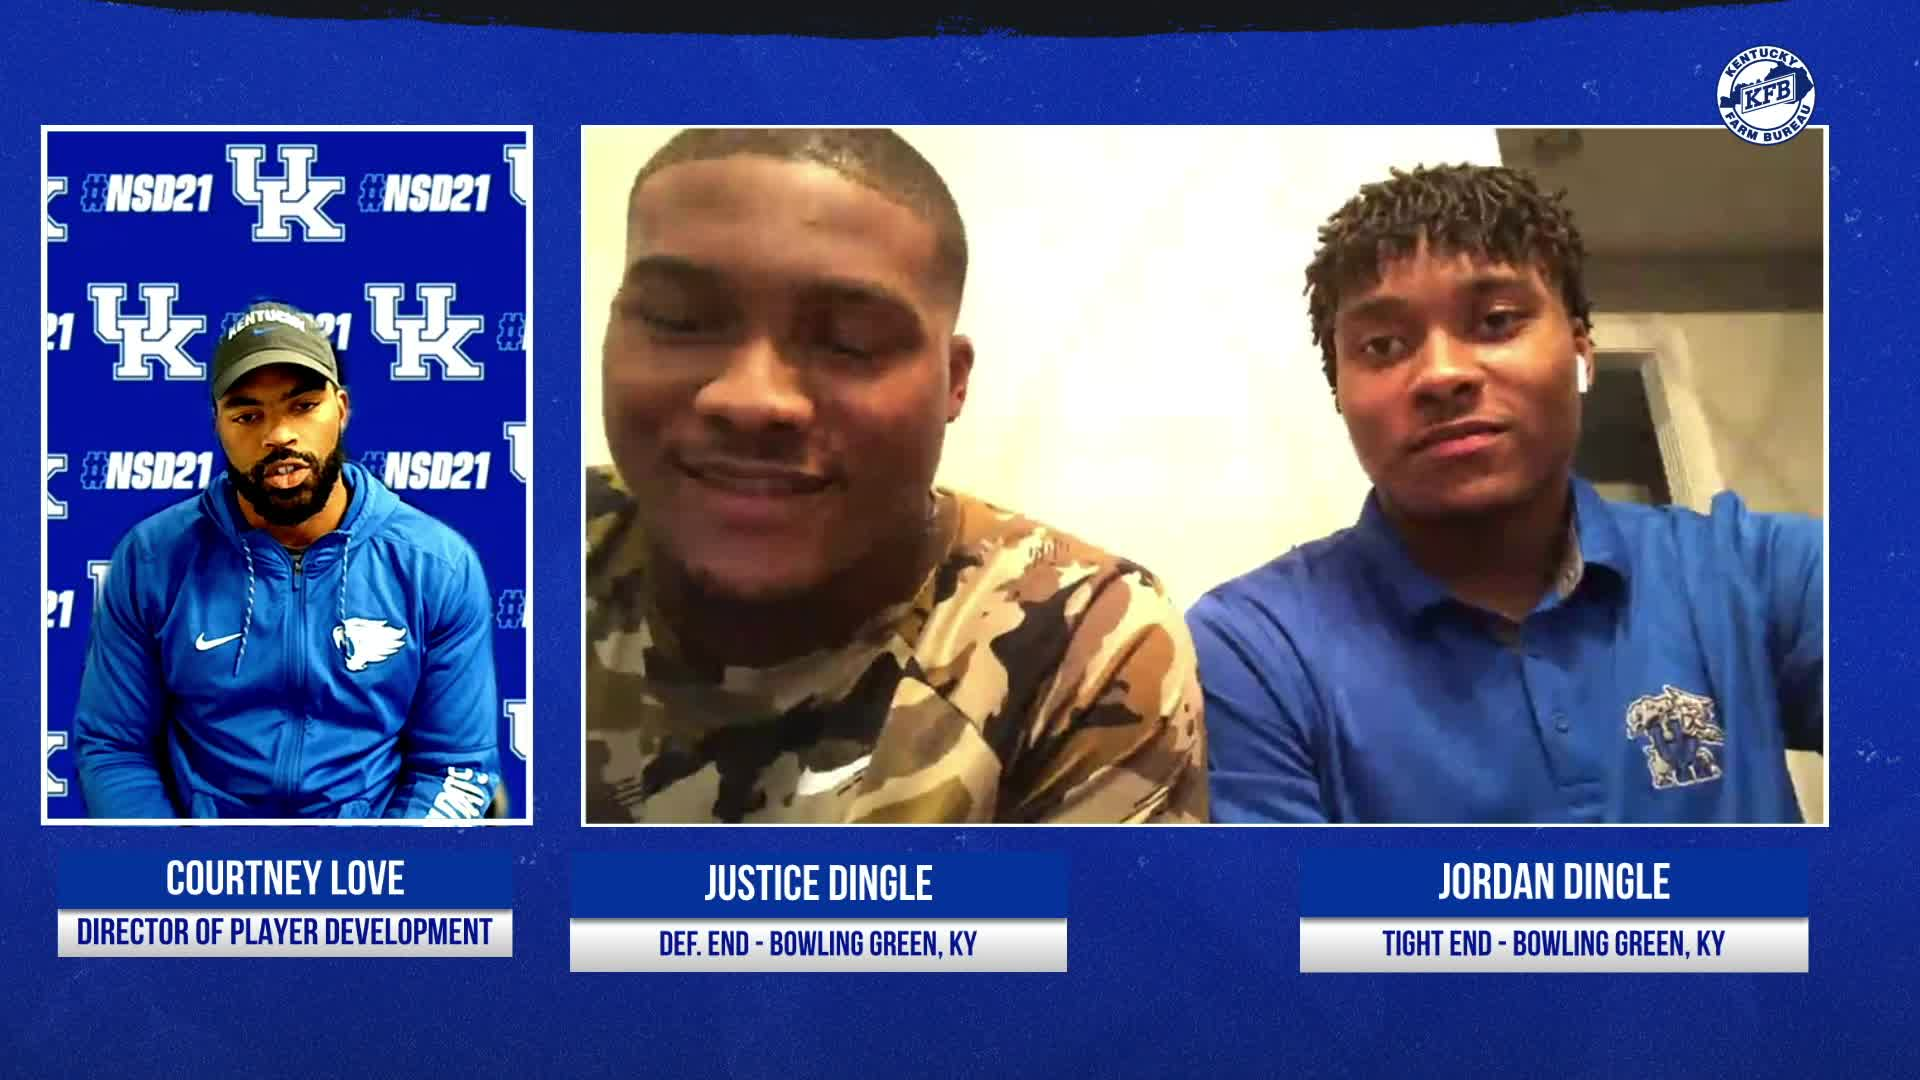 FB: Justice Dingle and Jordan Dingle - Signing Day Interview